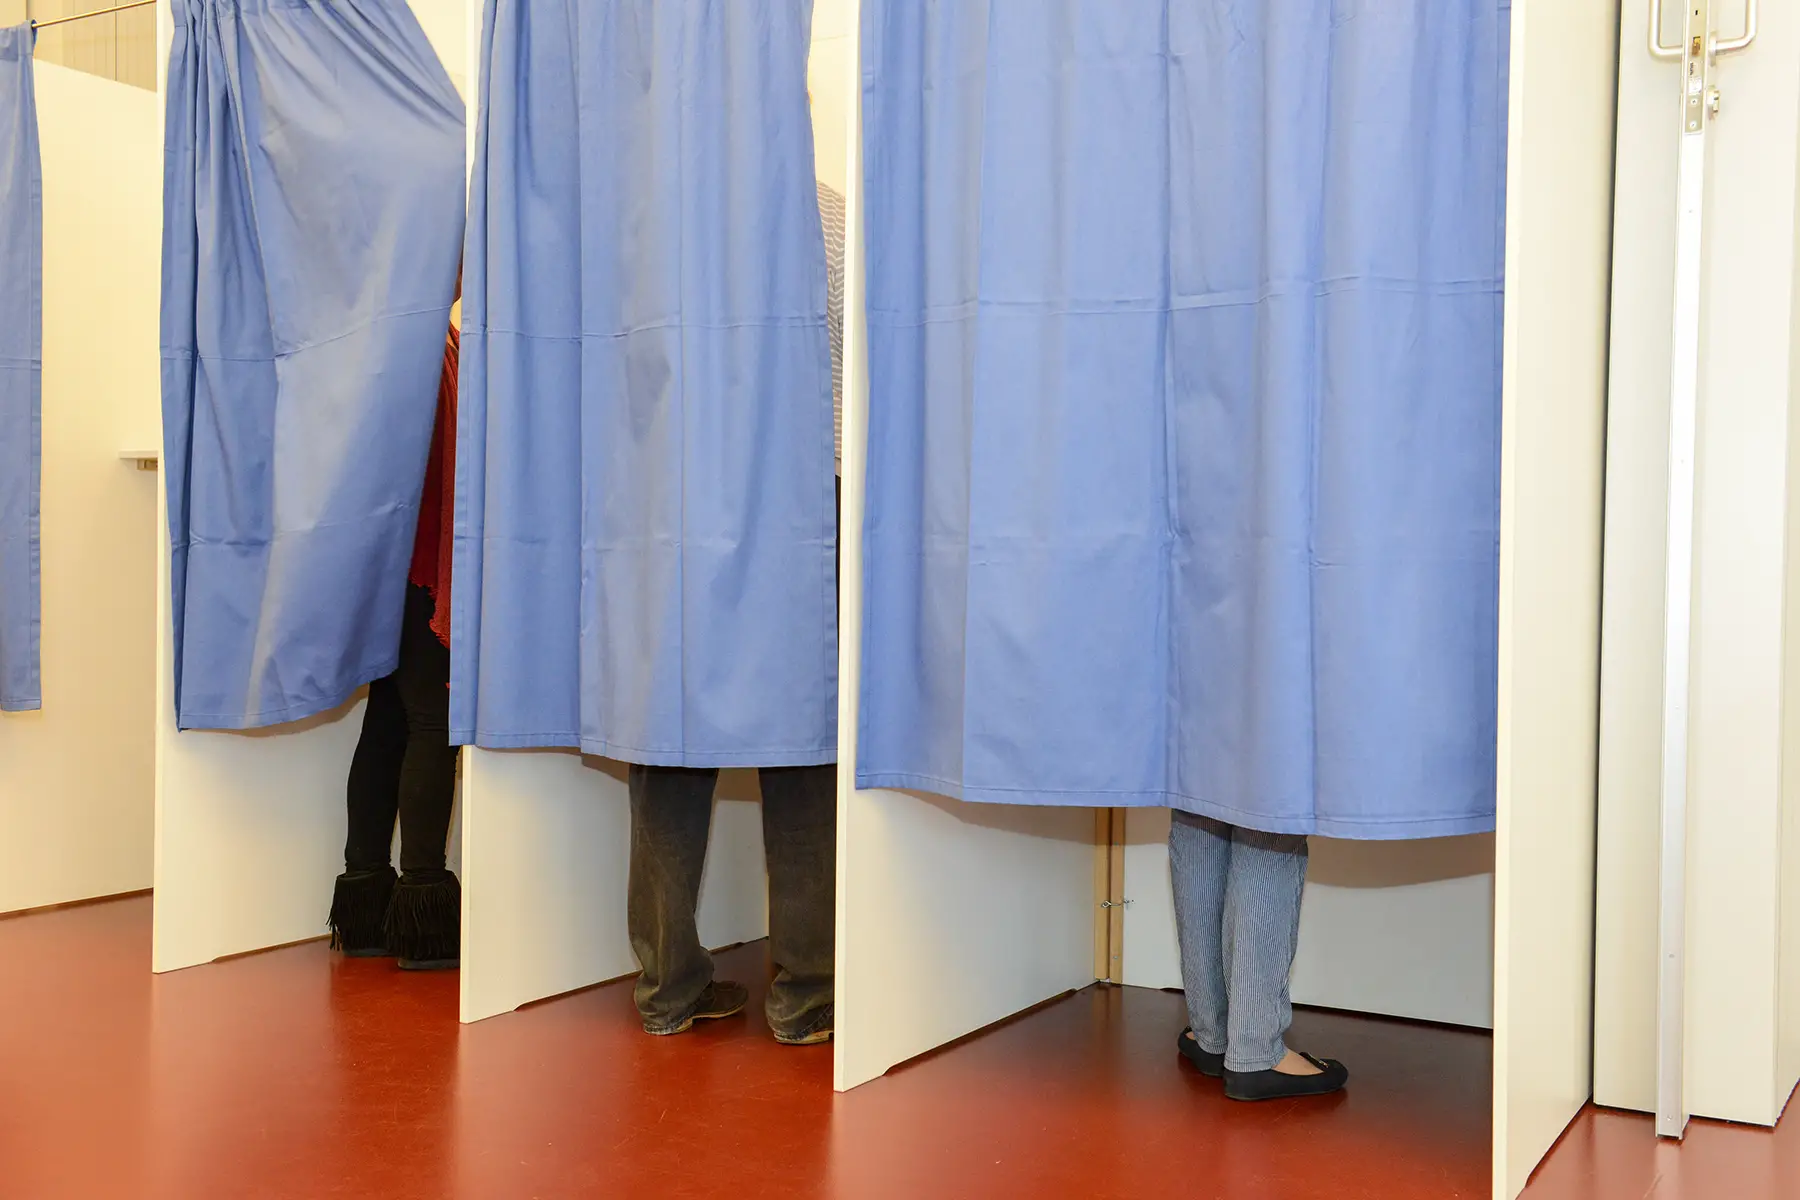 A voting booth in Lugano